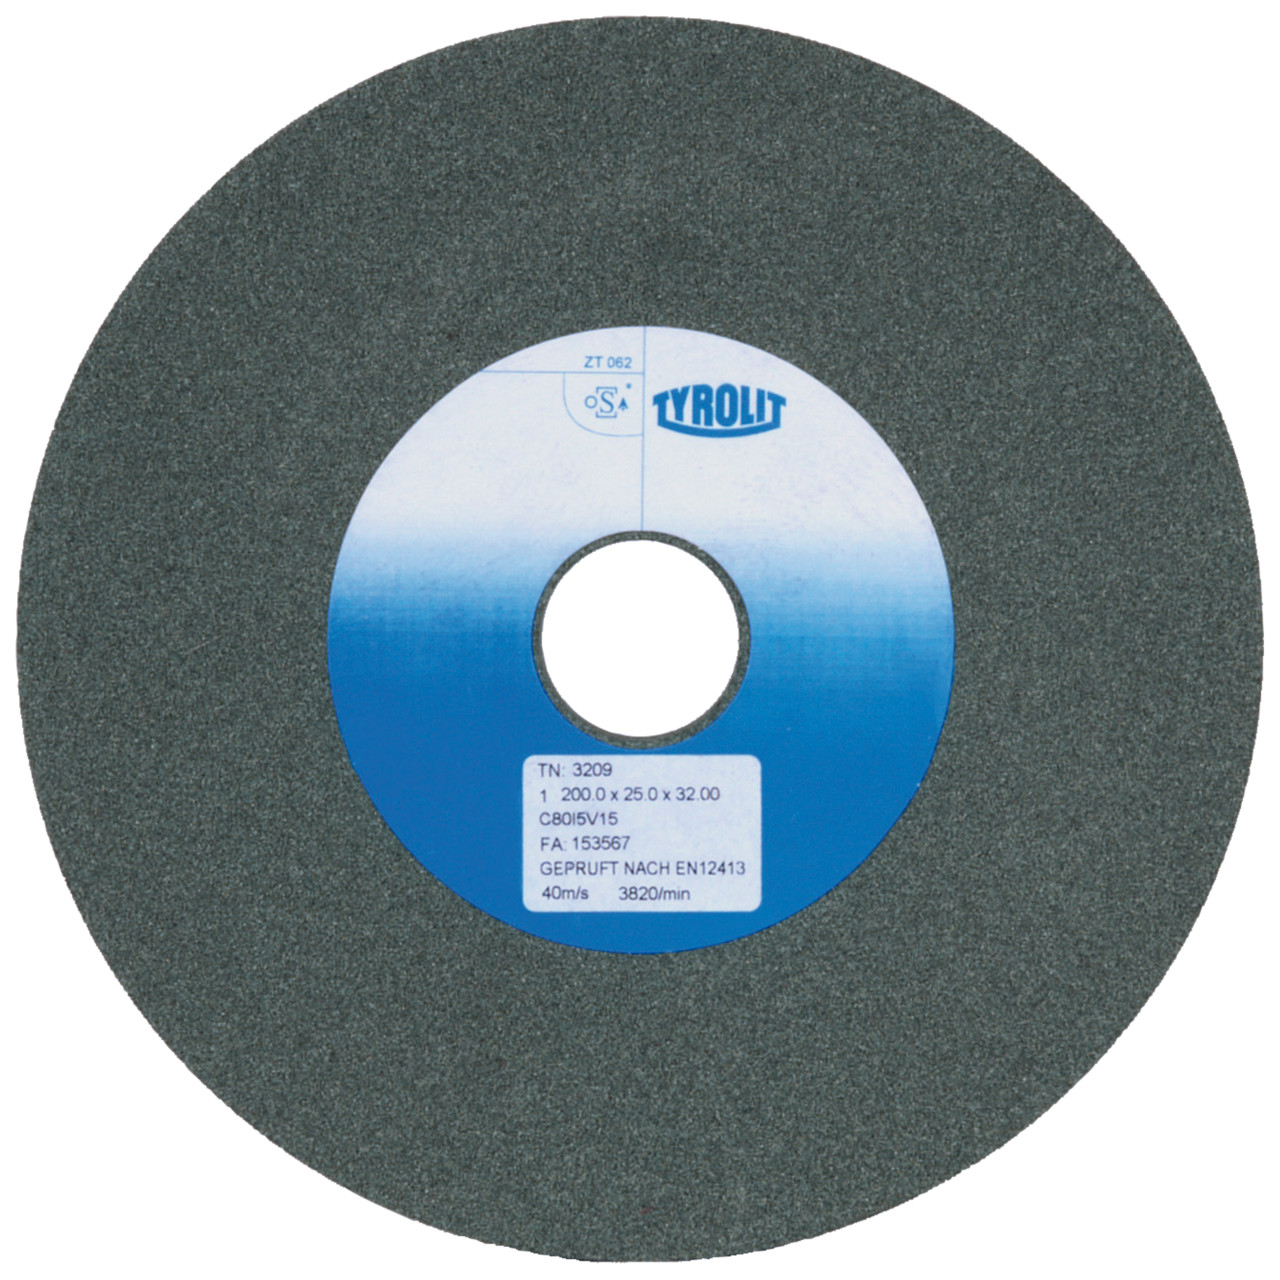 Tyrolit Conventional ceramic grinding discs DxDxH 200x25x51 For carbide and cast iron, shape: 1, Art. 822622